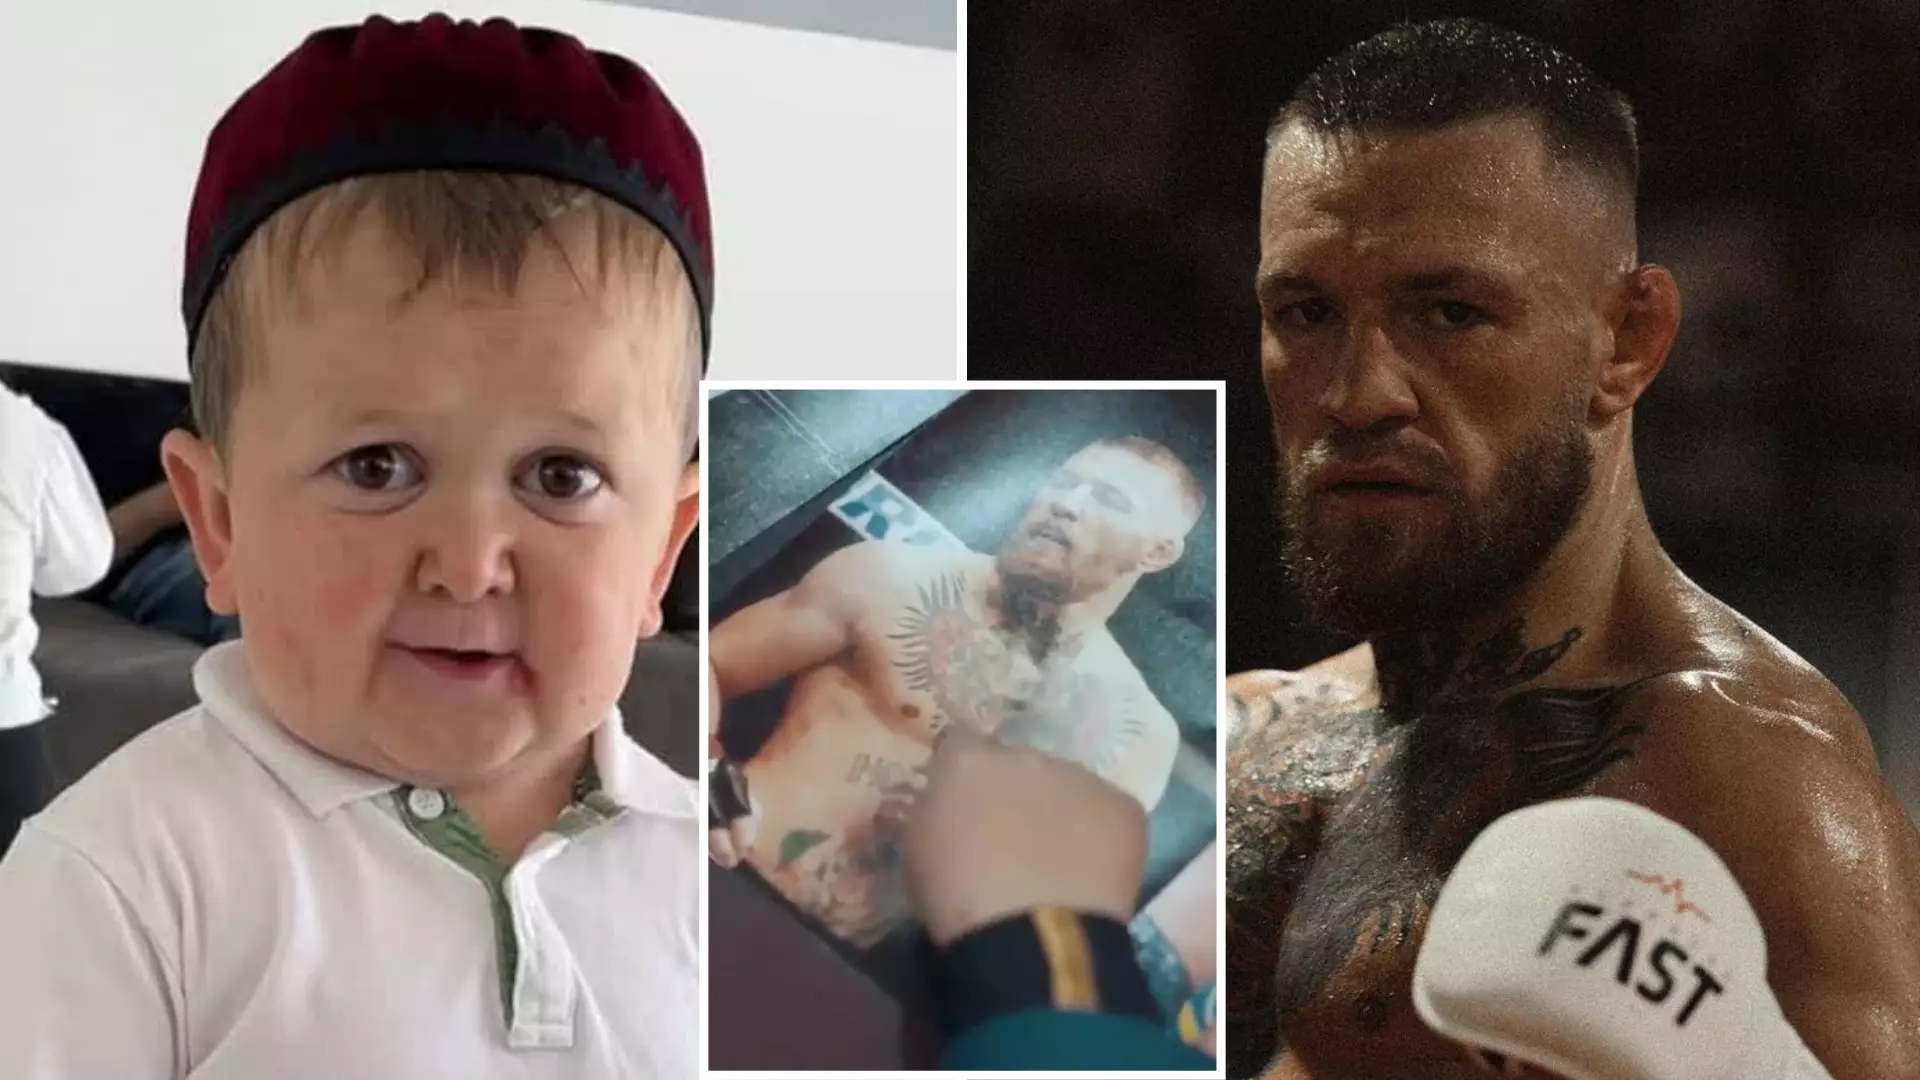 Hasbulla Magomedov Calls Out UFC Superstar Conor McGregor For A Fight